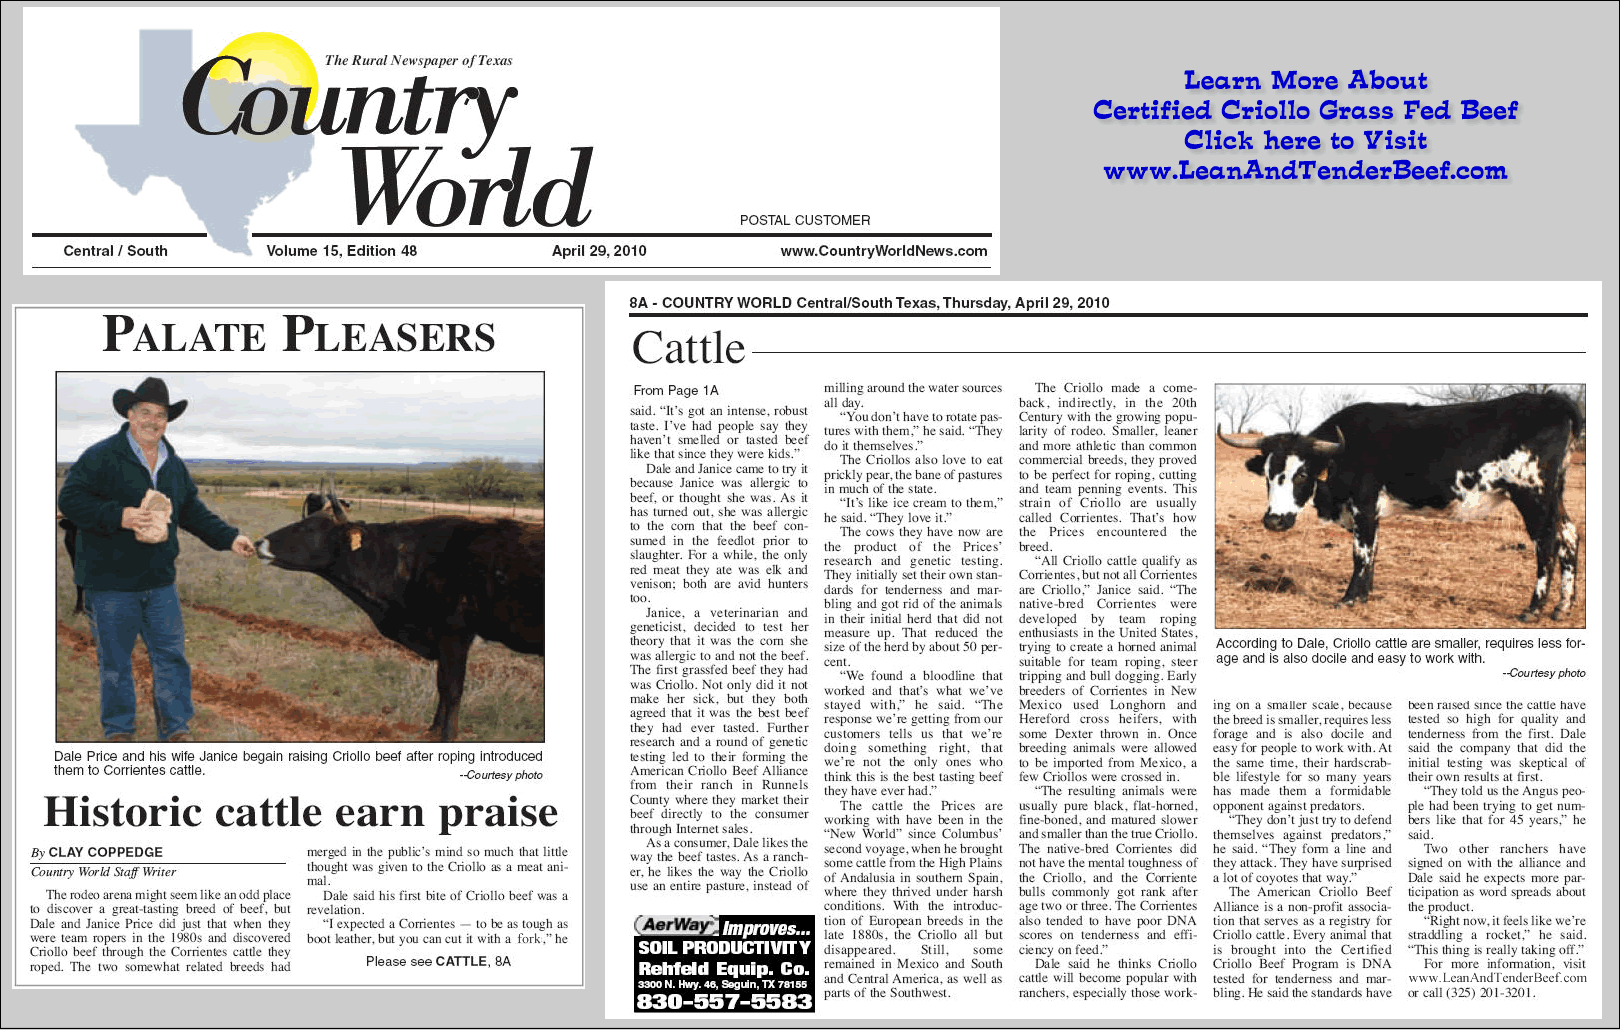 Grass Fed Certified Criollo Beef in the News!